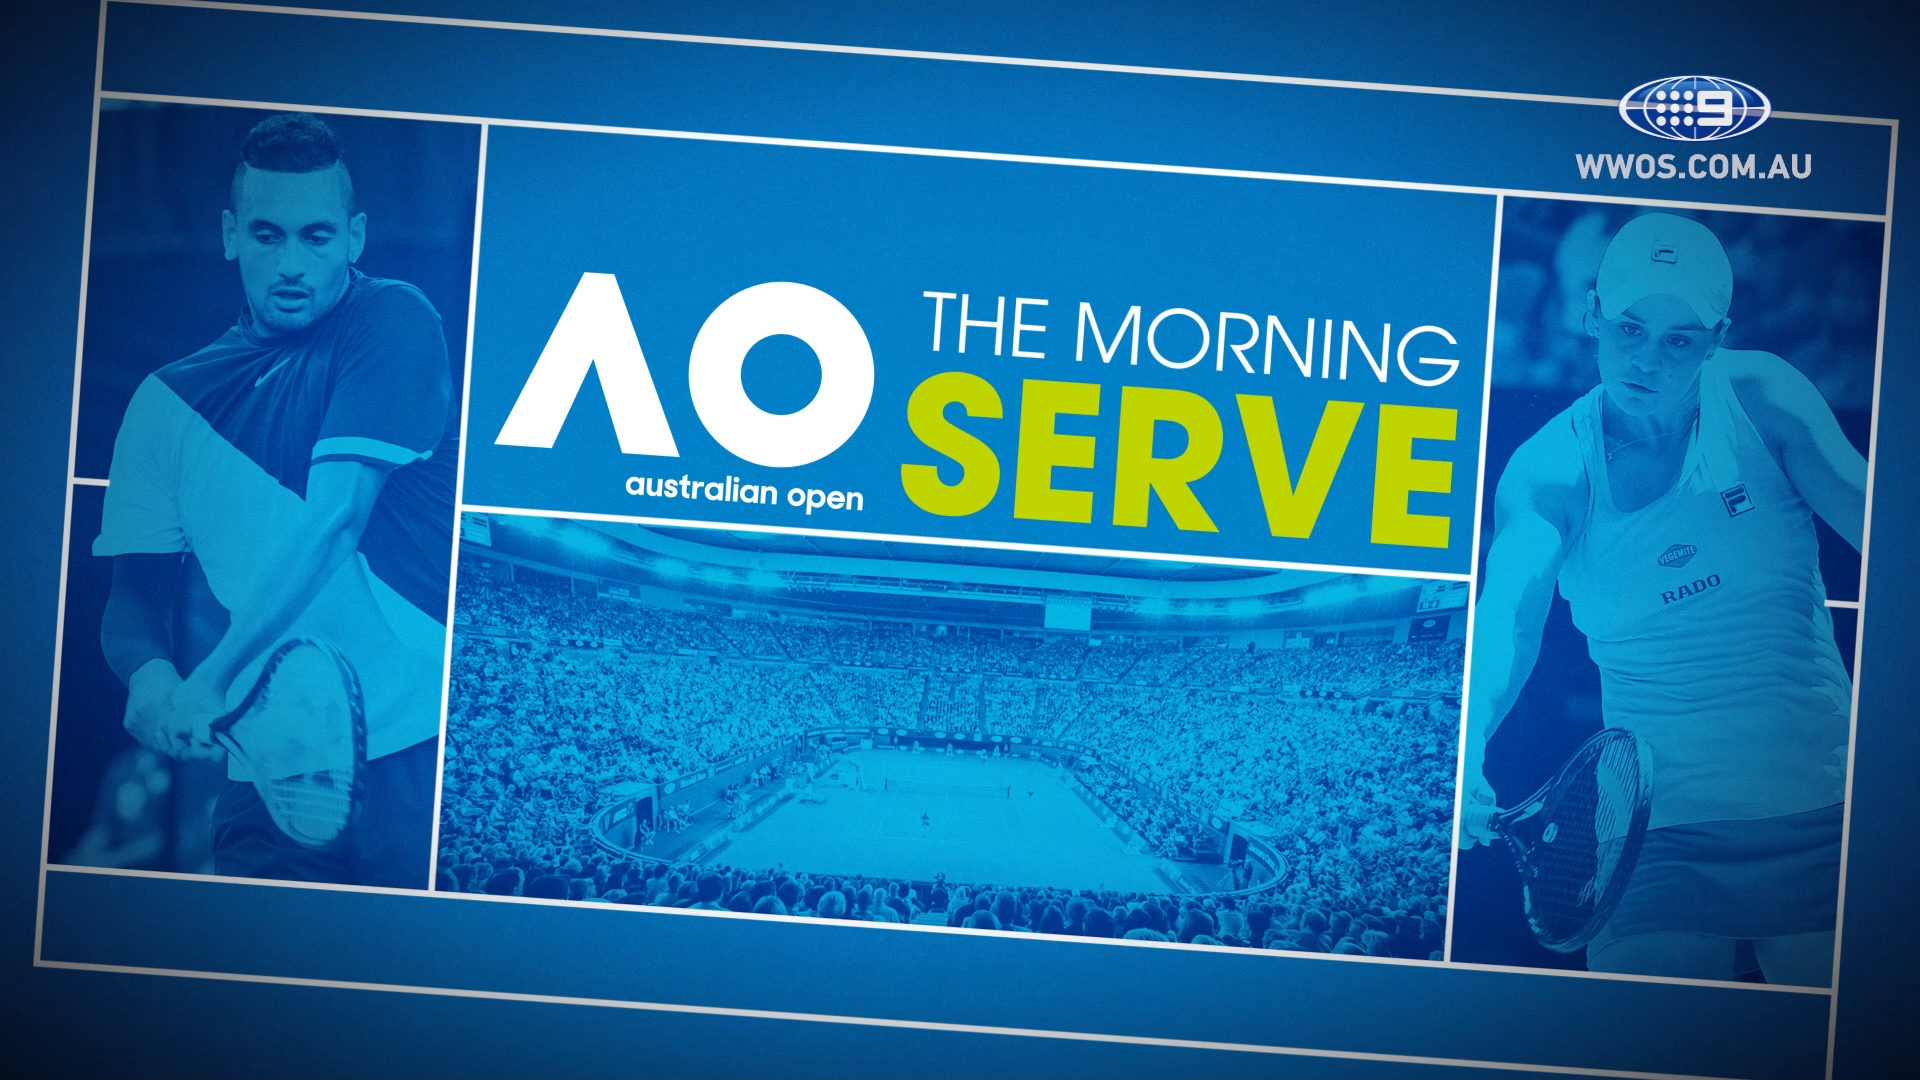 Barty's edge is her versatility: The Morning Serve